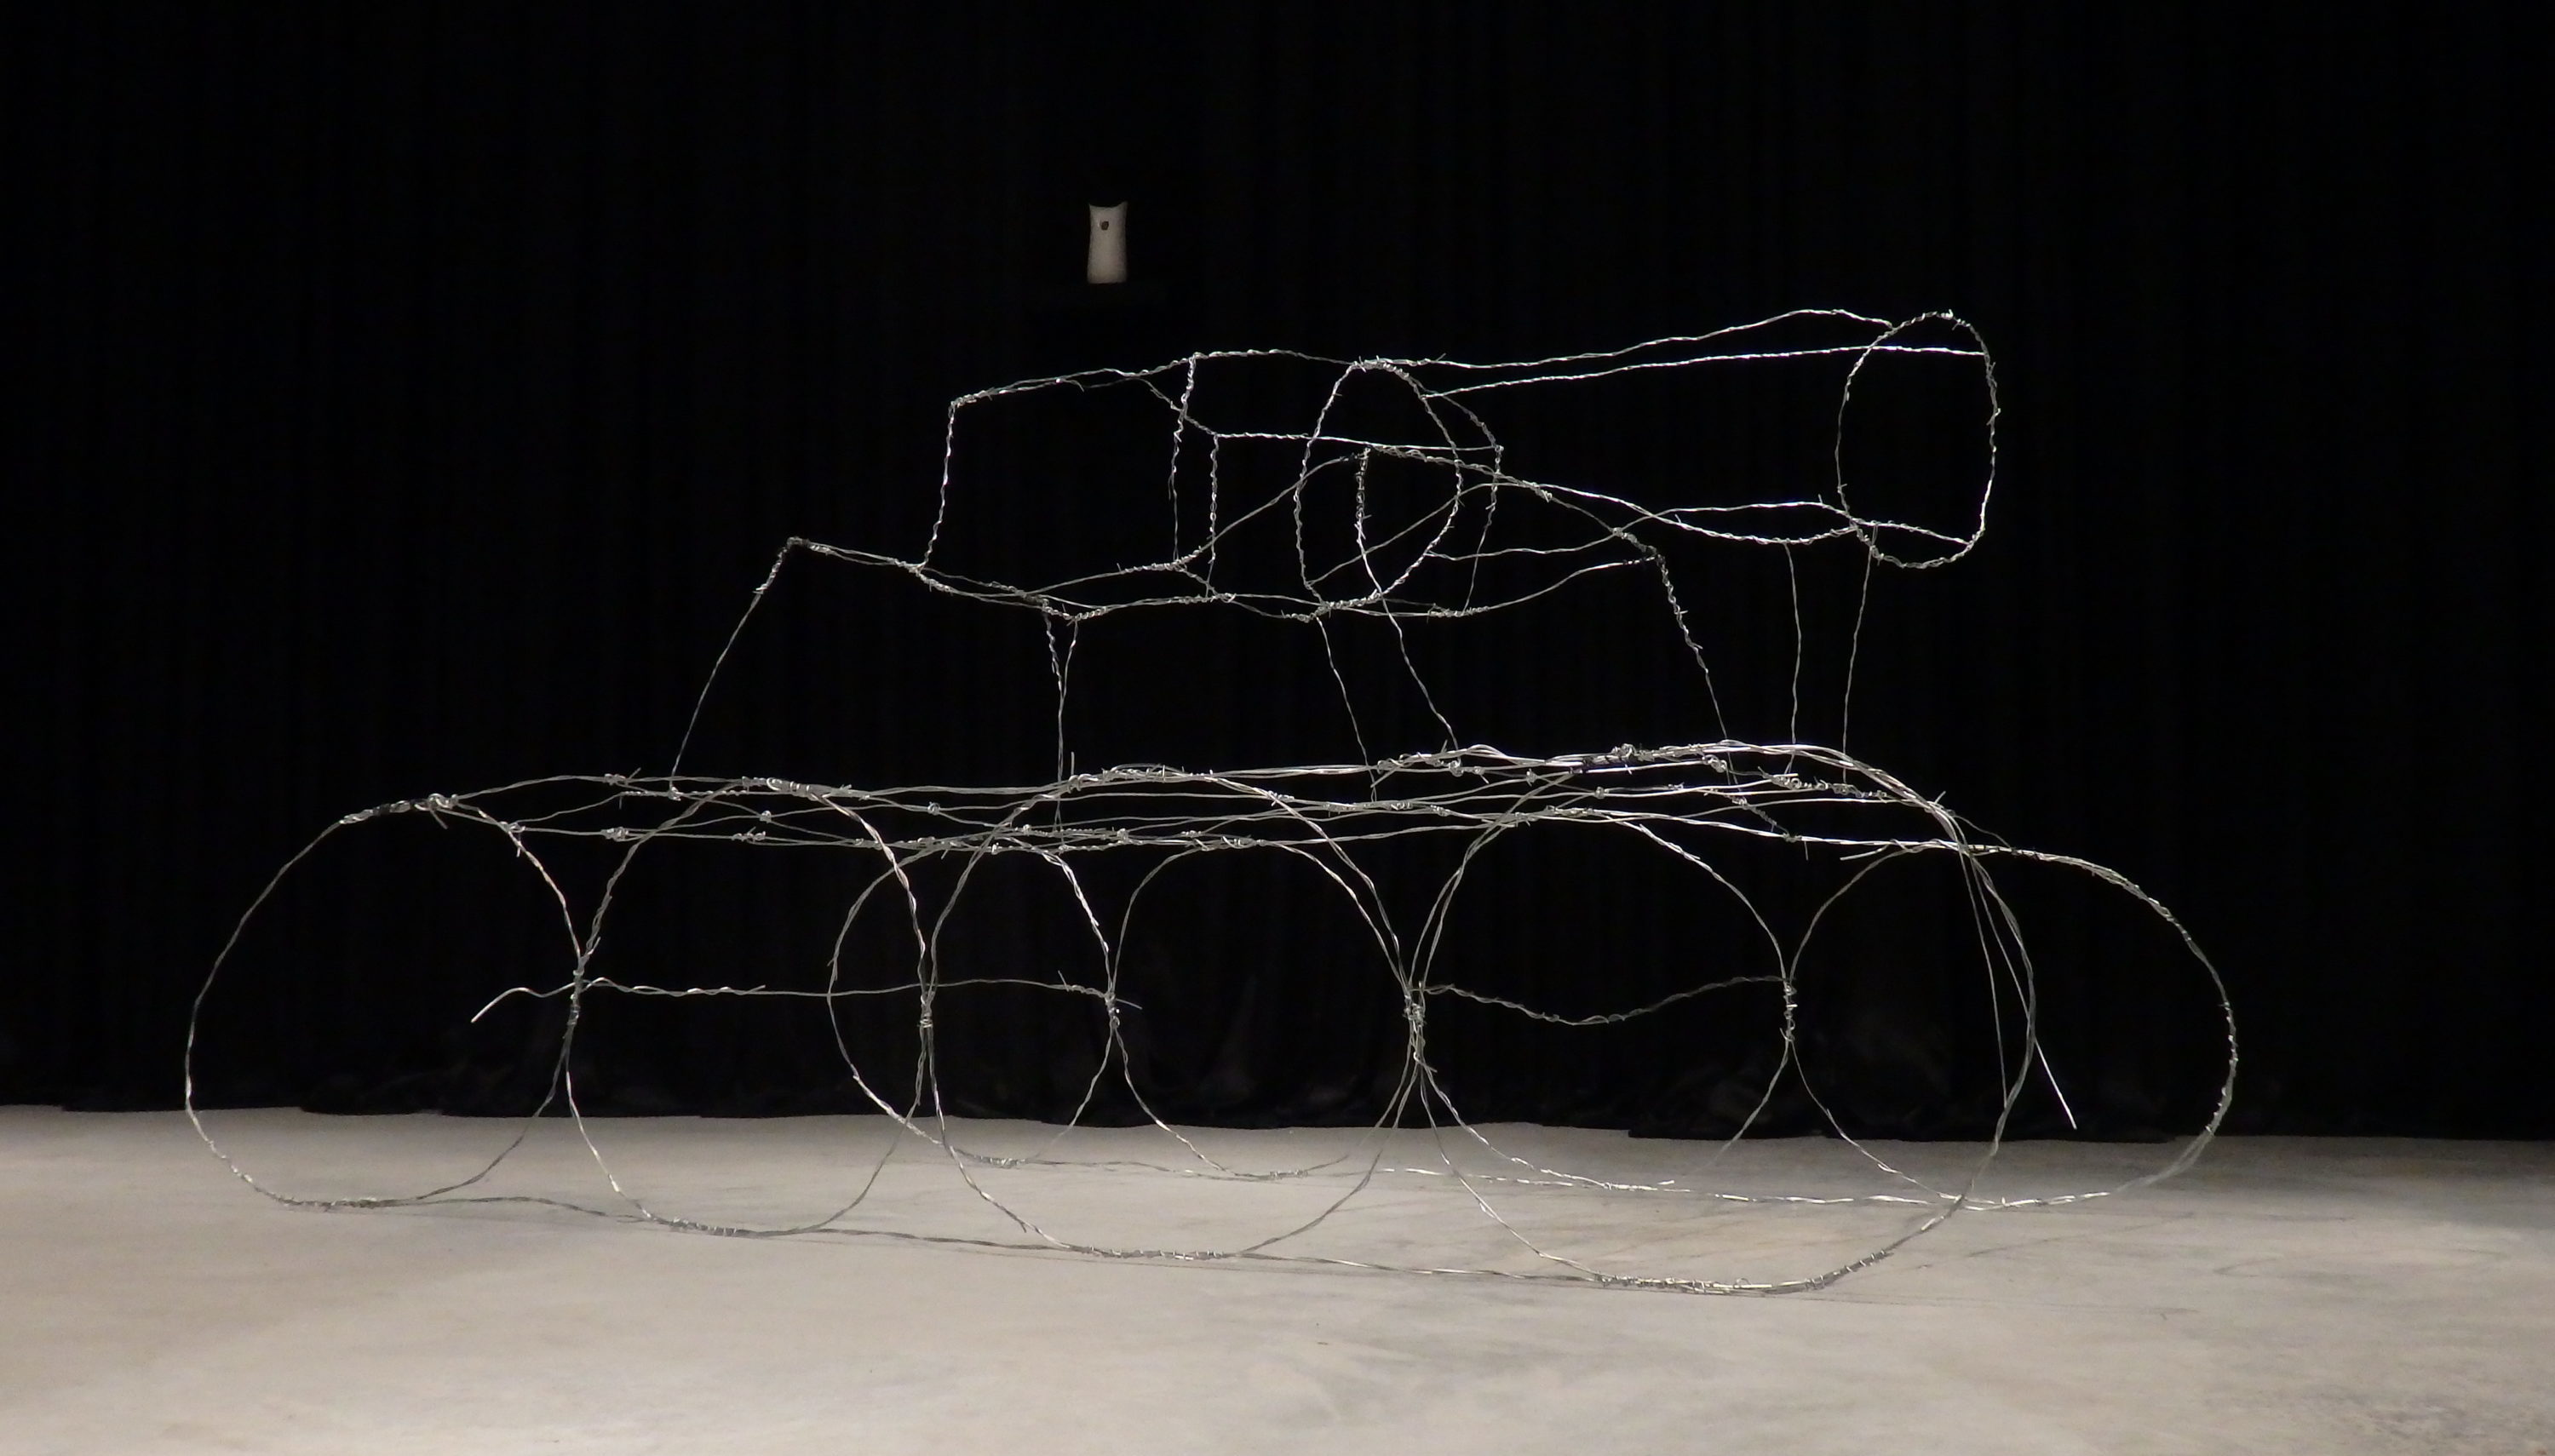 framework of a war tank made out of wire that is wrapped around itself